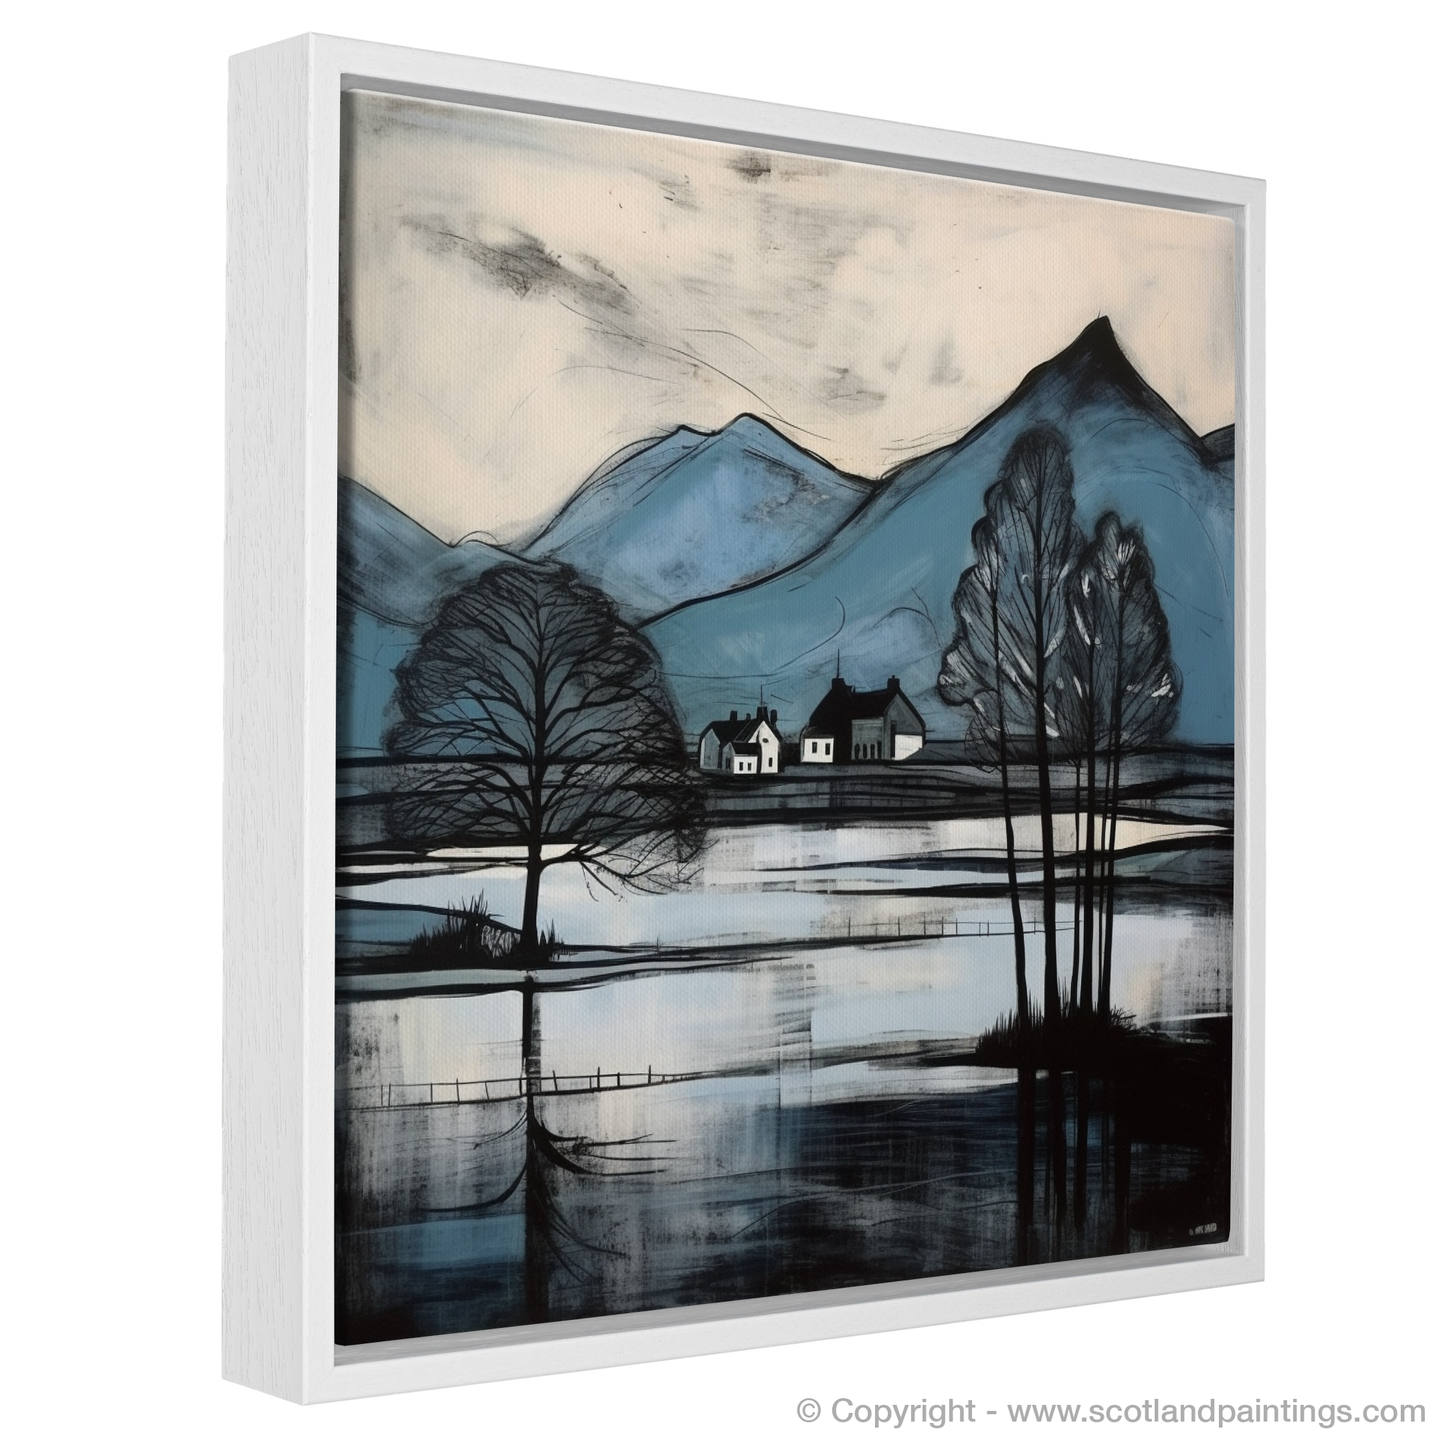 Painting and Art Print of Loch Awe, Argyll and Bute entitled "Majestic Serenity of Loch Awe".